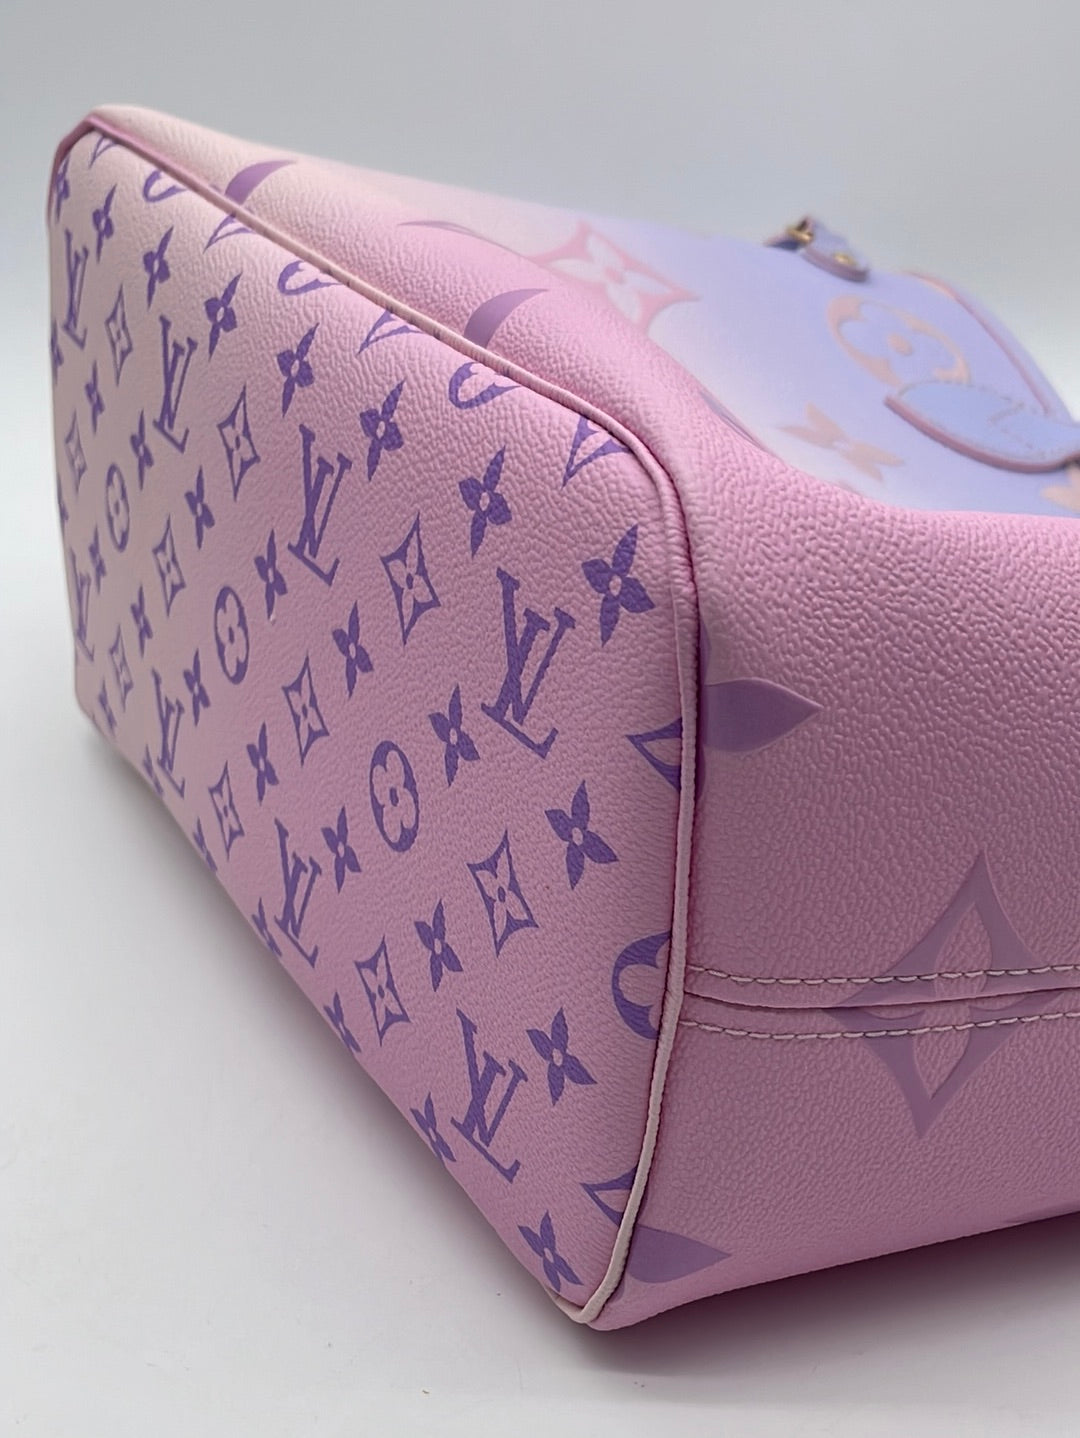 Louis Vuitton ONTHEGO GM Sunrise Pastel Tote Pink Purple Giant